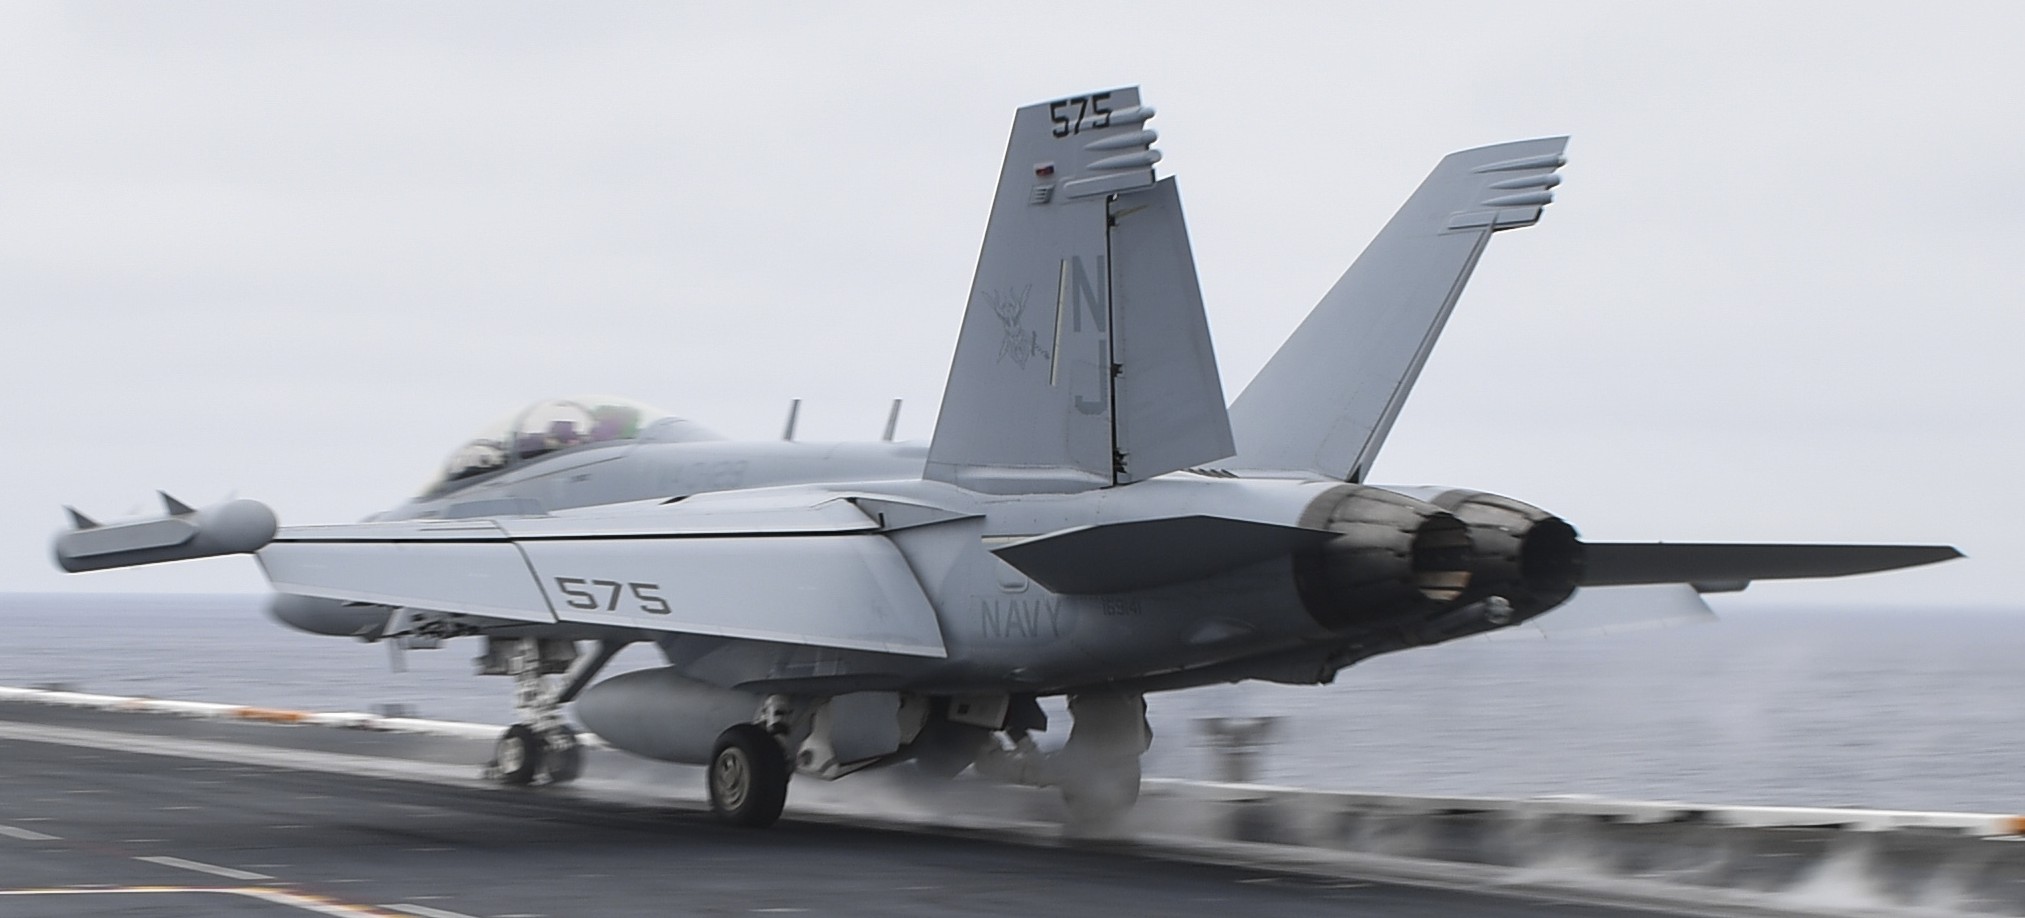 vaq-129 vikings electronic attack squadron fleet replacement frs us navy ea-18g growler 54